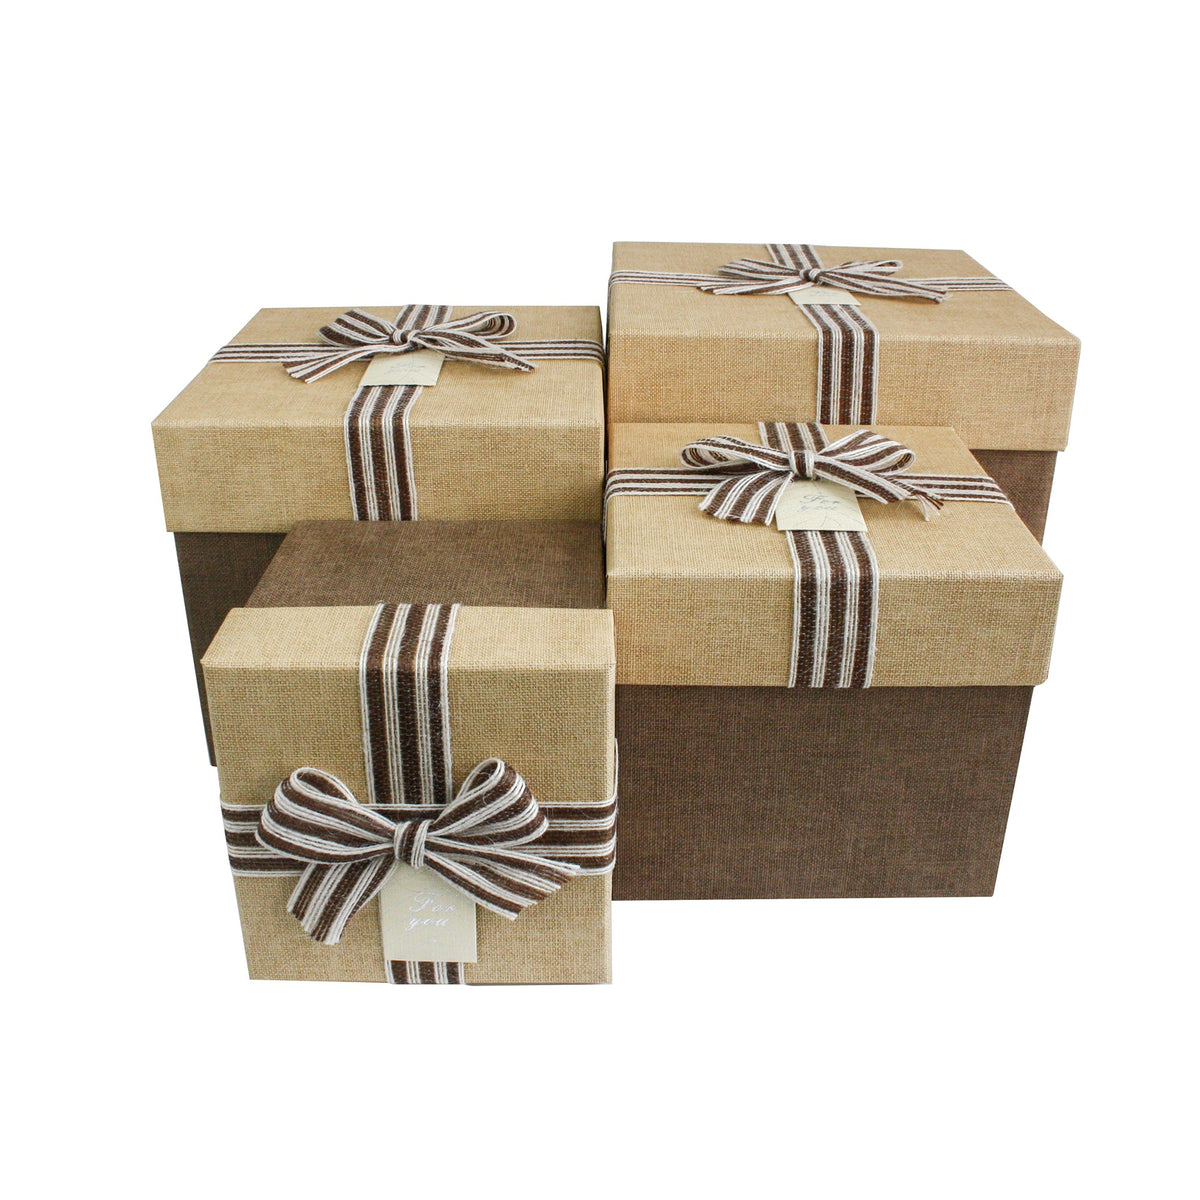 Set of 4 Dark Brown Gift Box with Striped Bow Ribbon